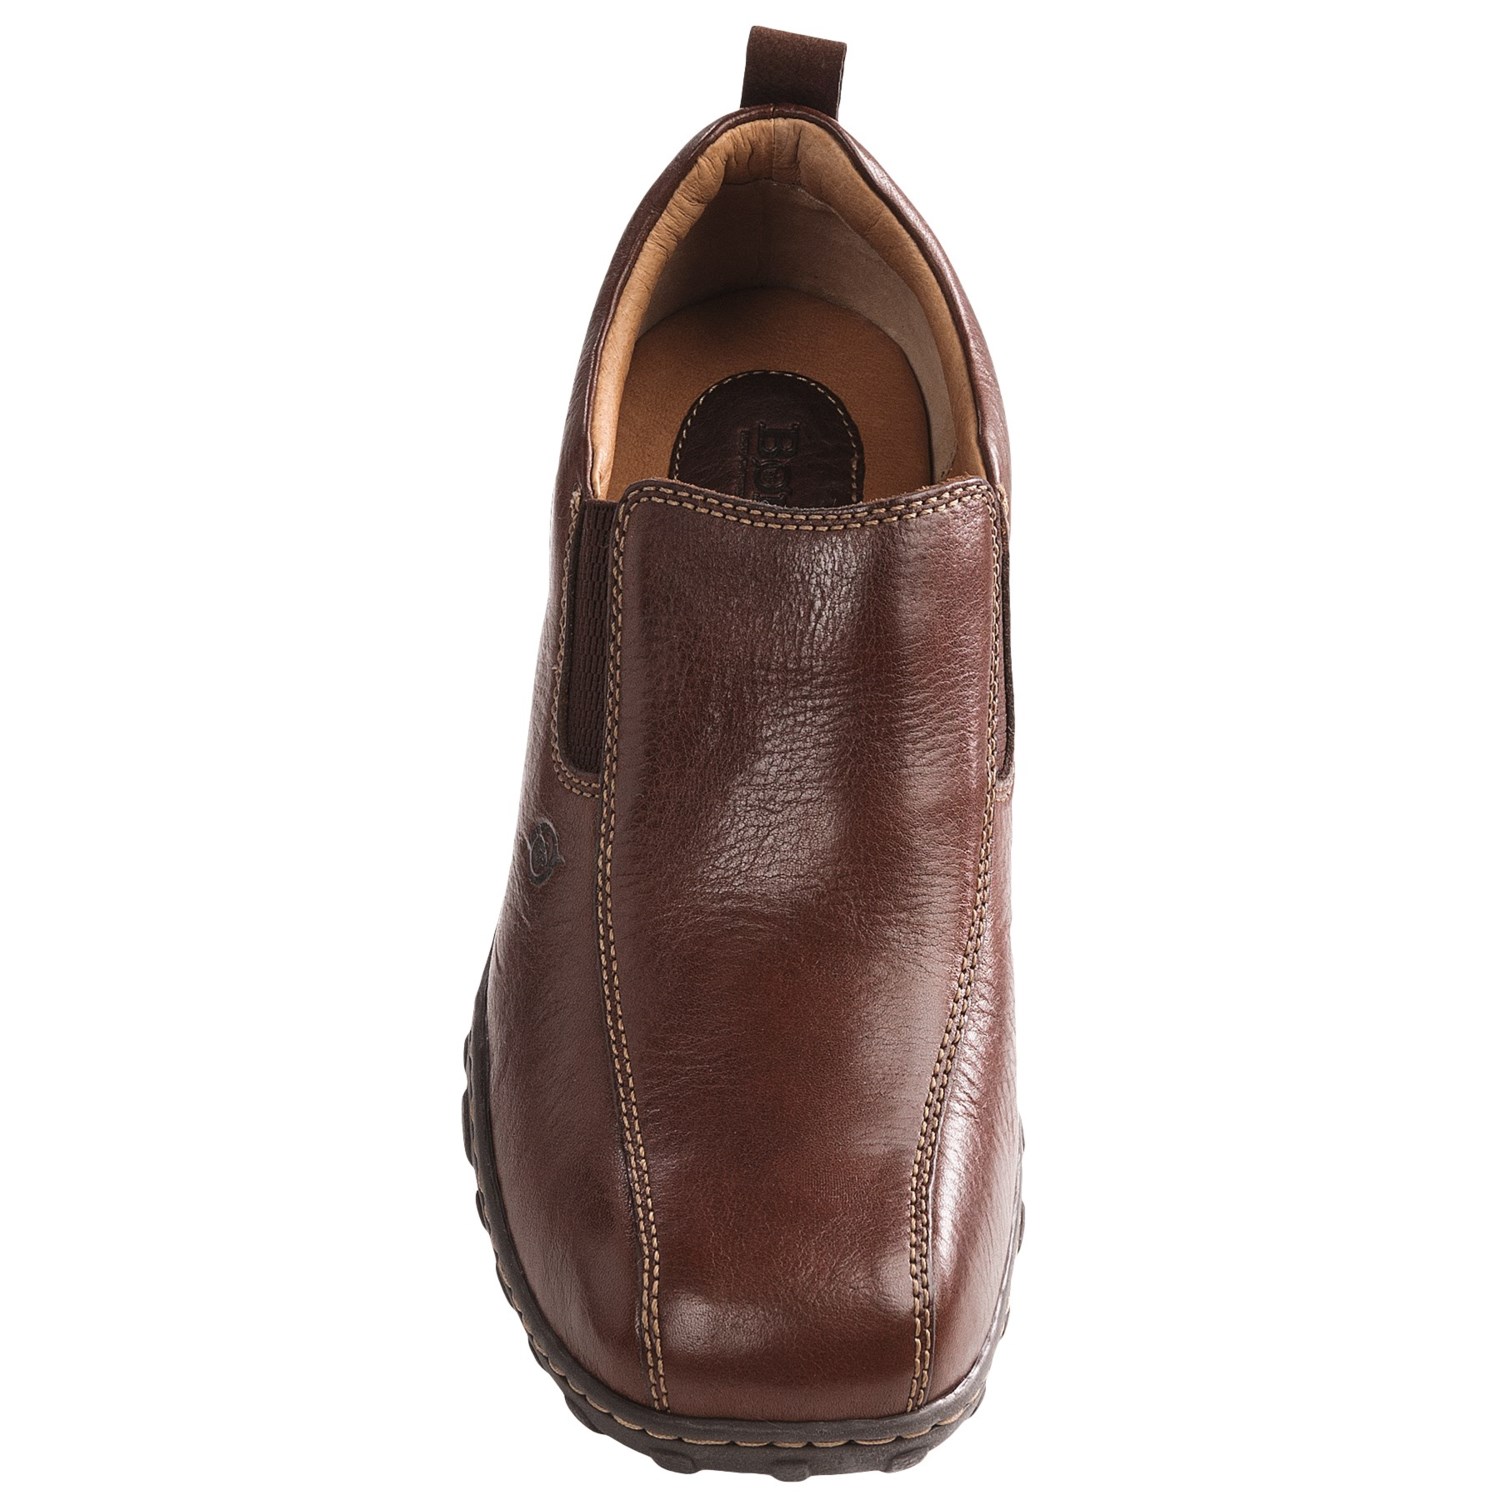 Born Winfield II Shoes (For Men) 6530T - Save 31%